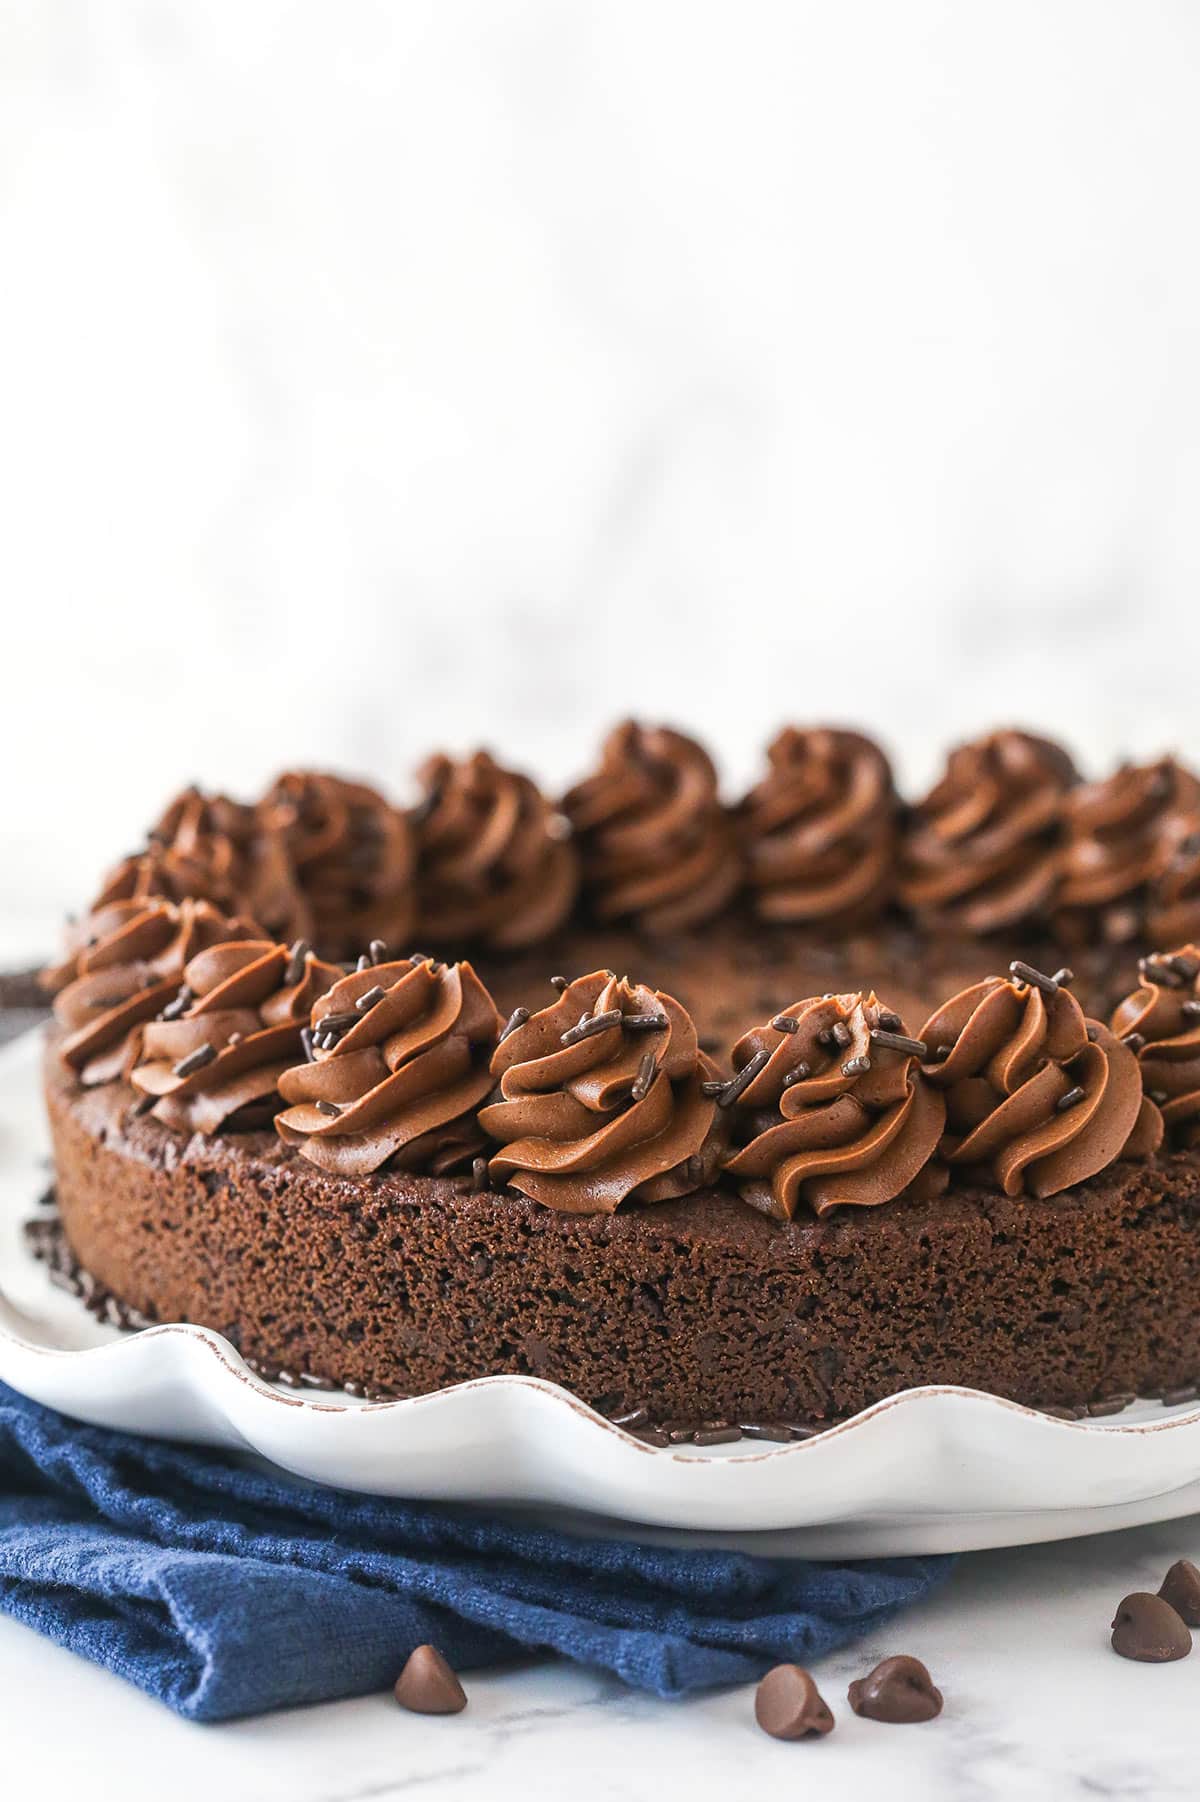 Chocolate cookie cake on a serving platter.